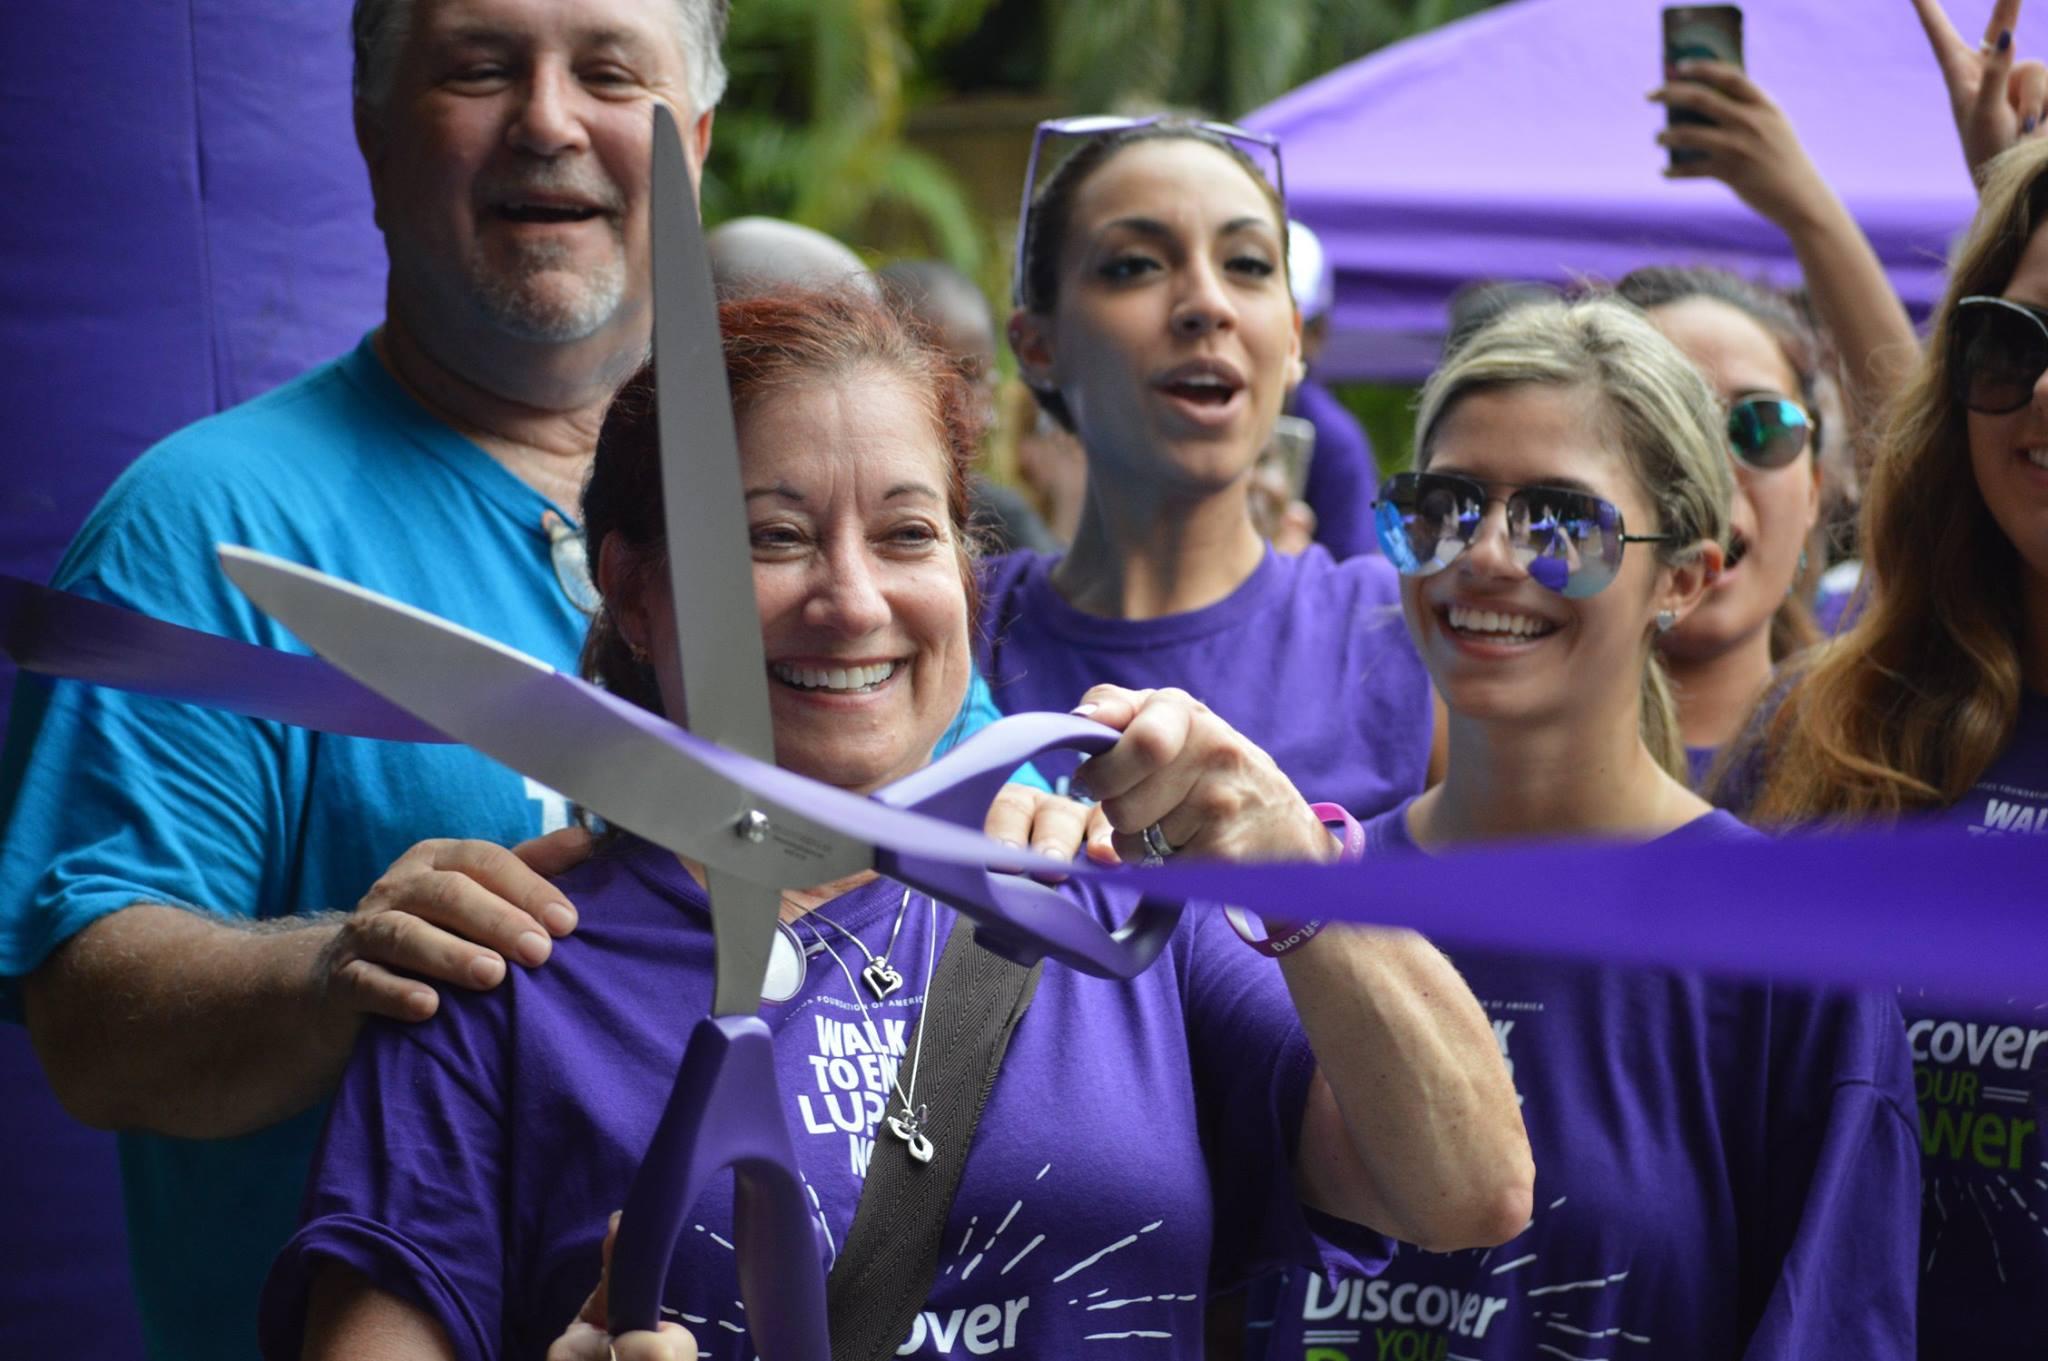 2017 Walk to End Lupus Now and Wellness Expo, Palm Beach